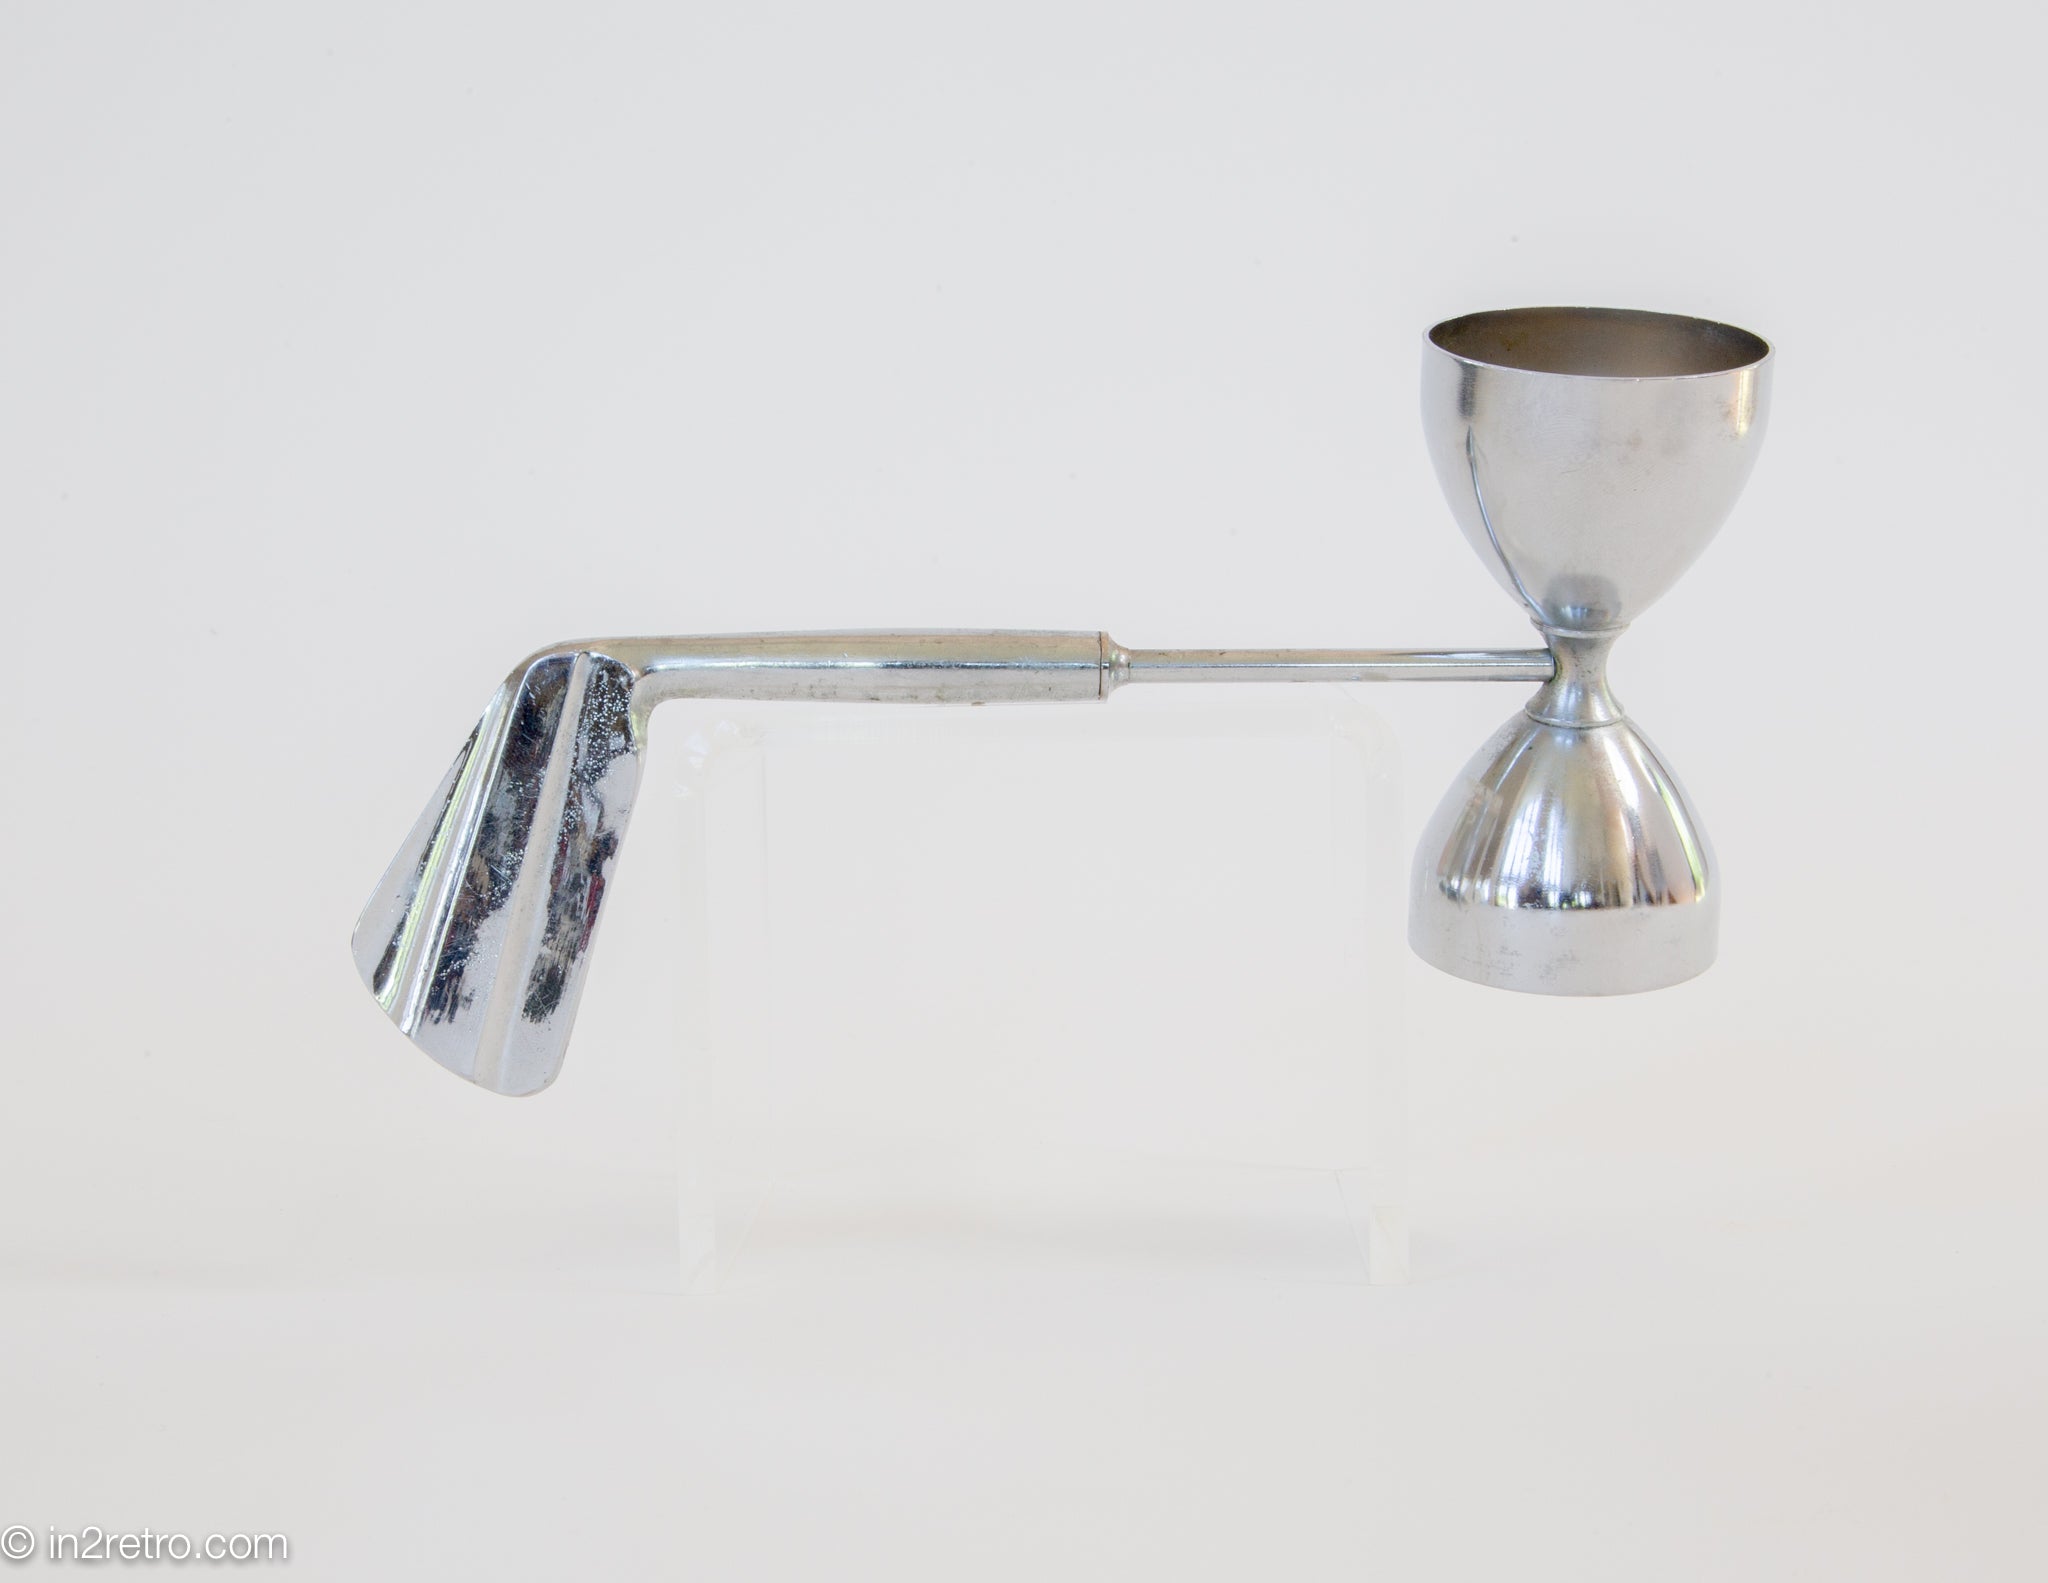 Stainless Steel Cocktail Shot, Metal Double Side Jigger, Double